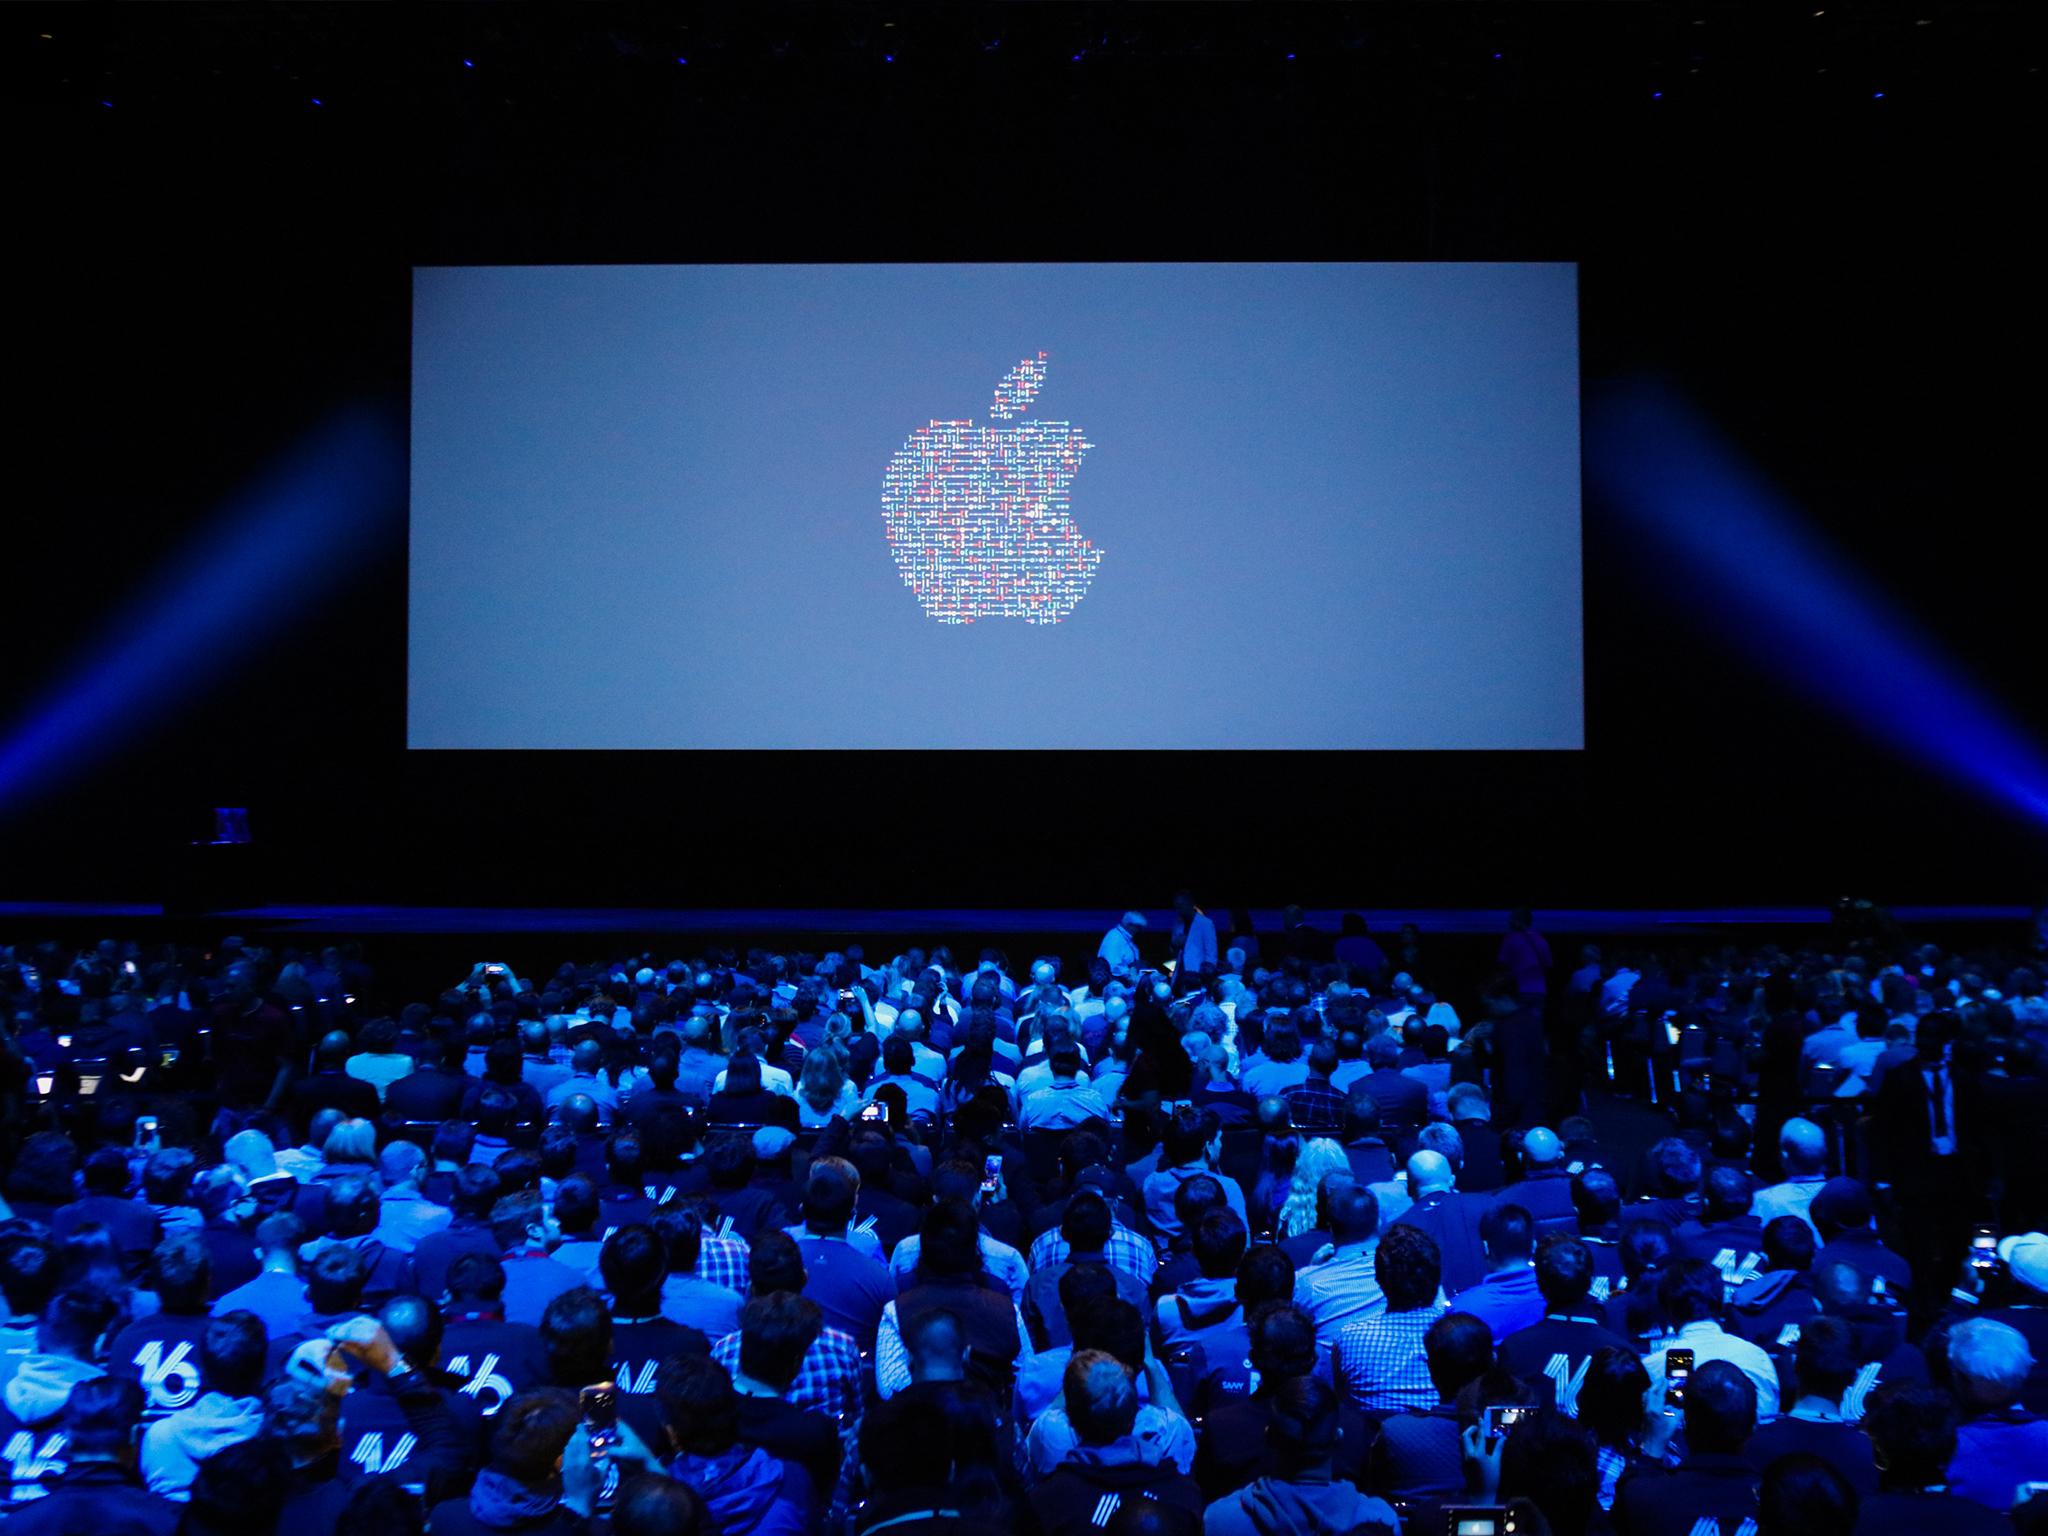 People take their seats ahead of Apple's annual Worldwide Developers Conference presentation at the Bill Graham Civic Auditorium in San Francisco, California, on June 13, 2016